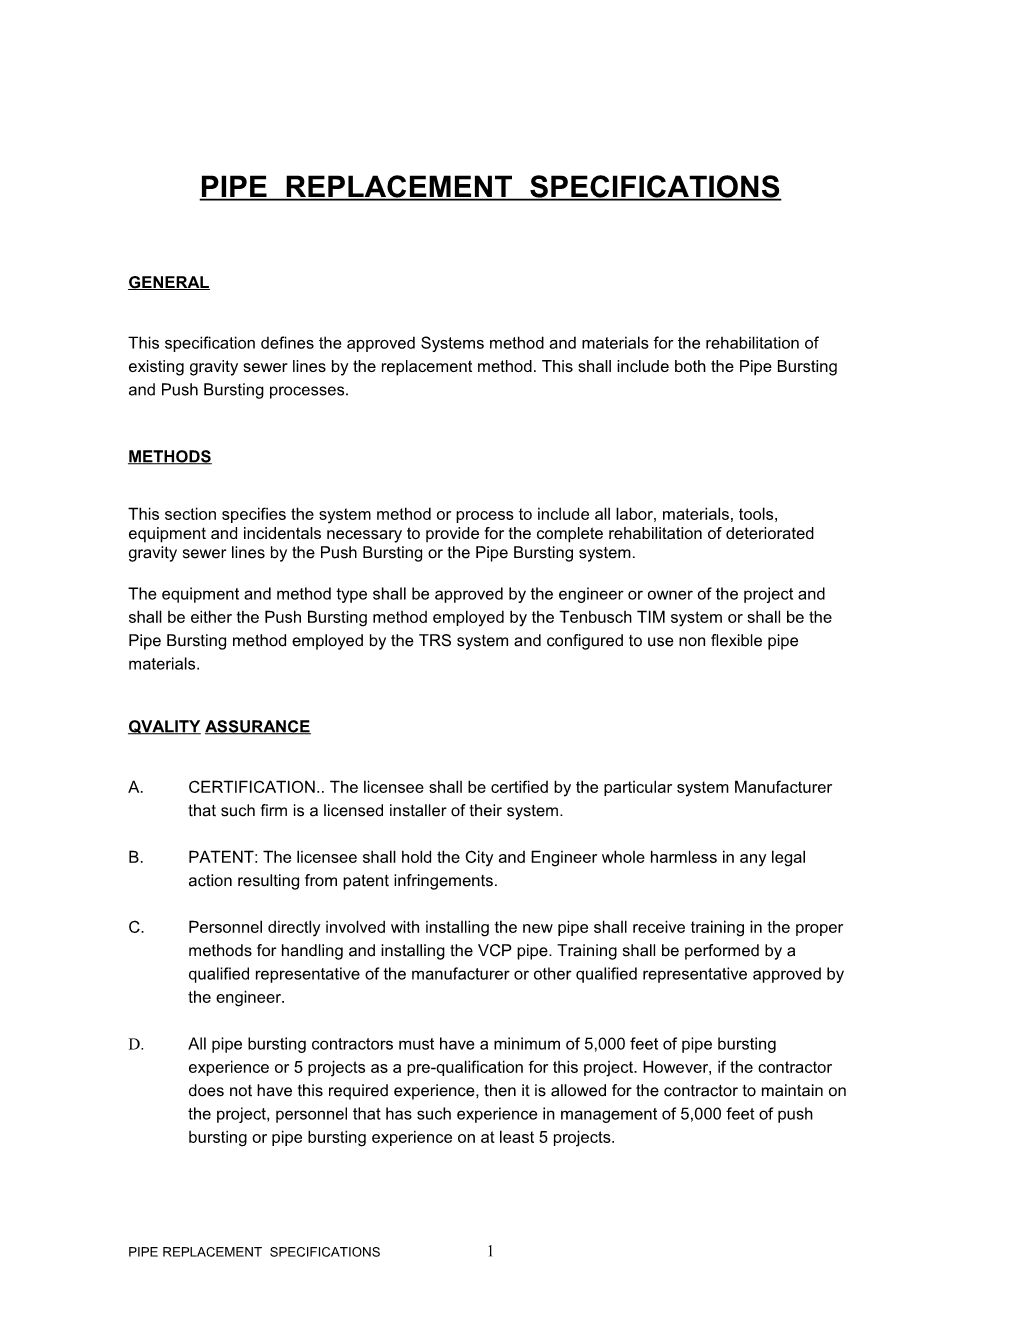 Pipe Replacement Specifications